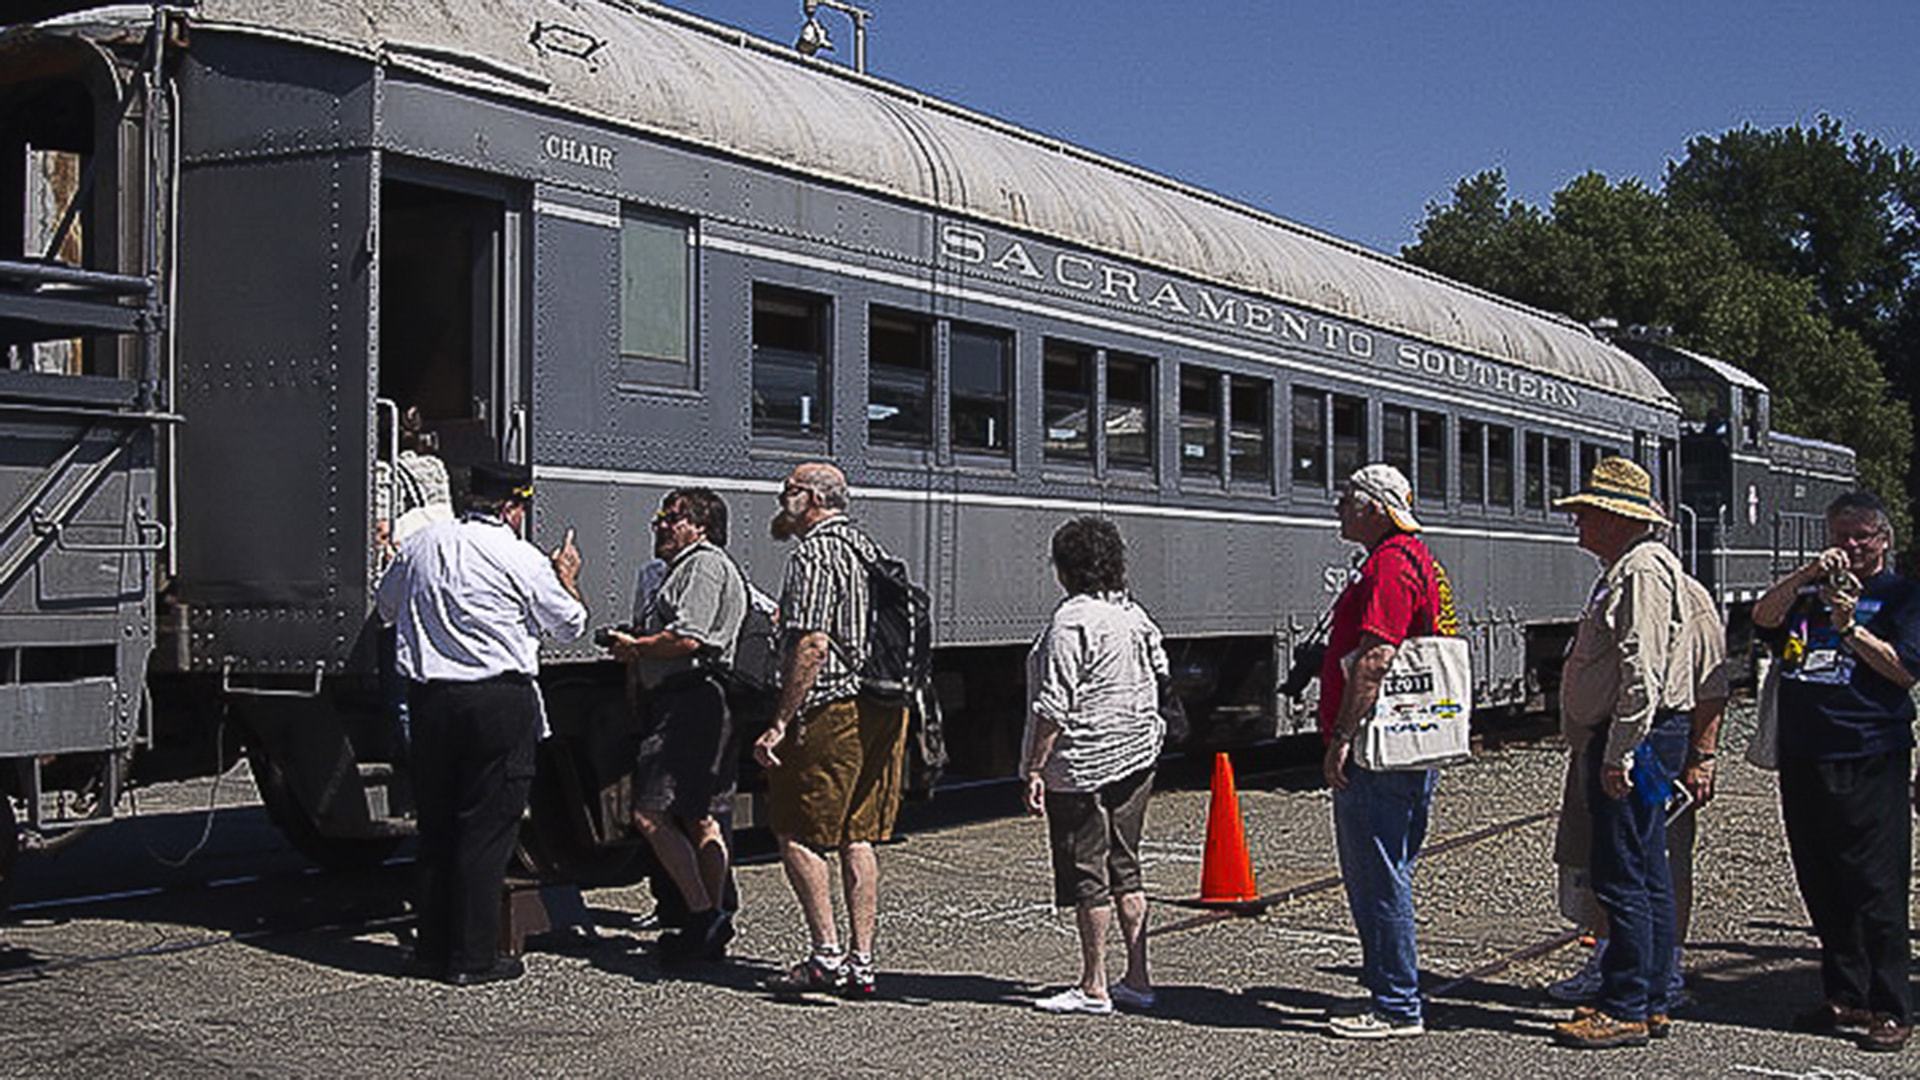 Excursion Train Rides Group Tickets